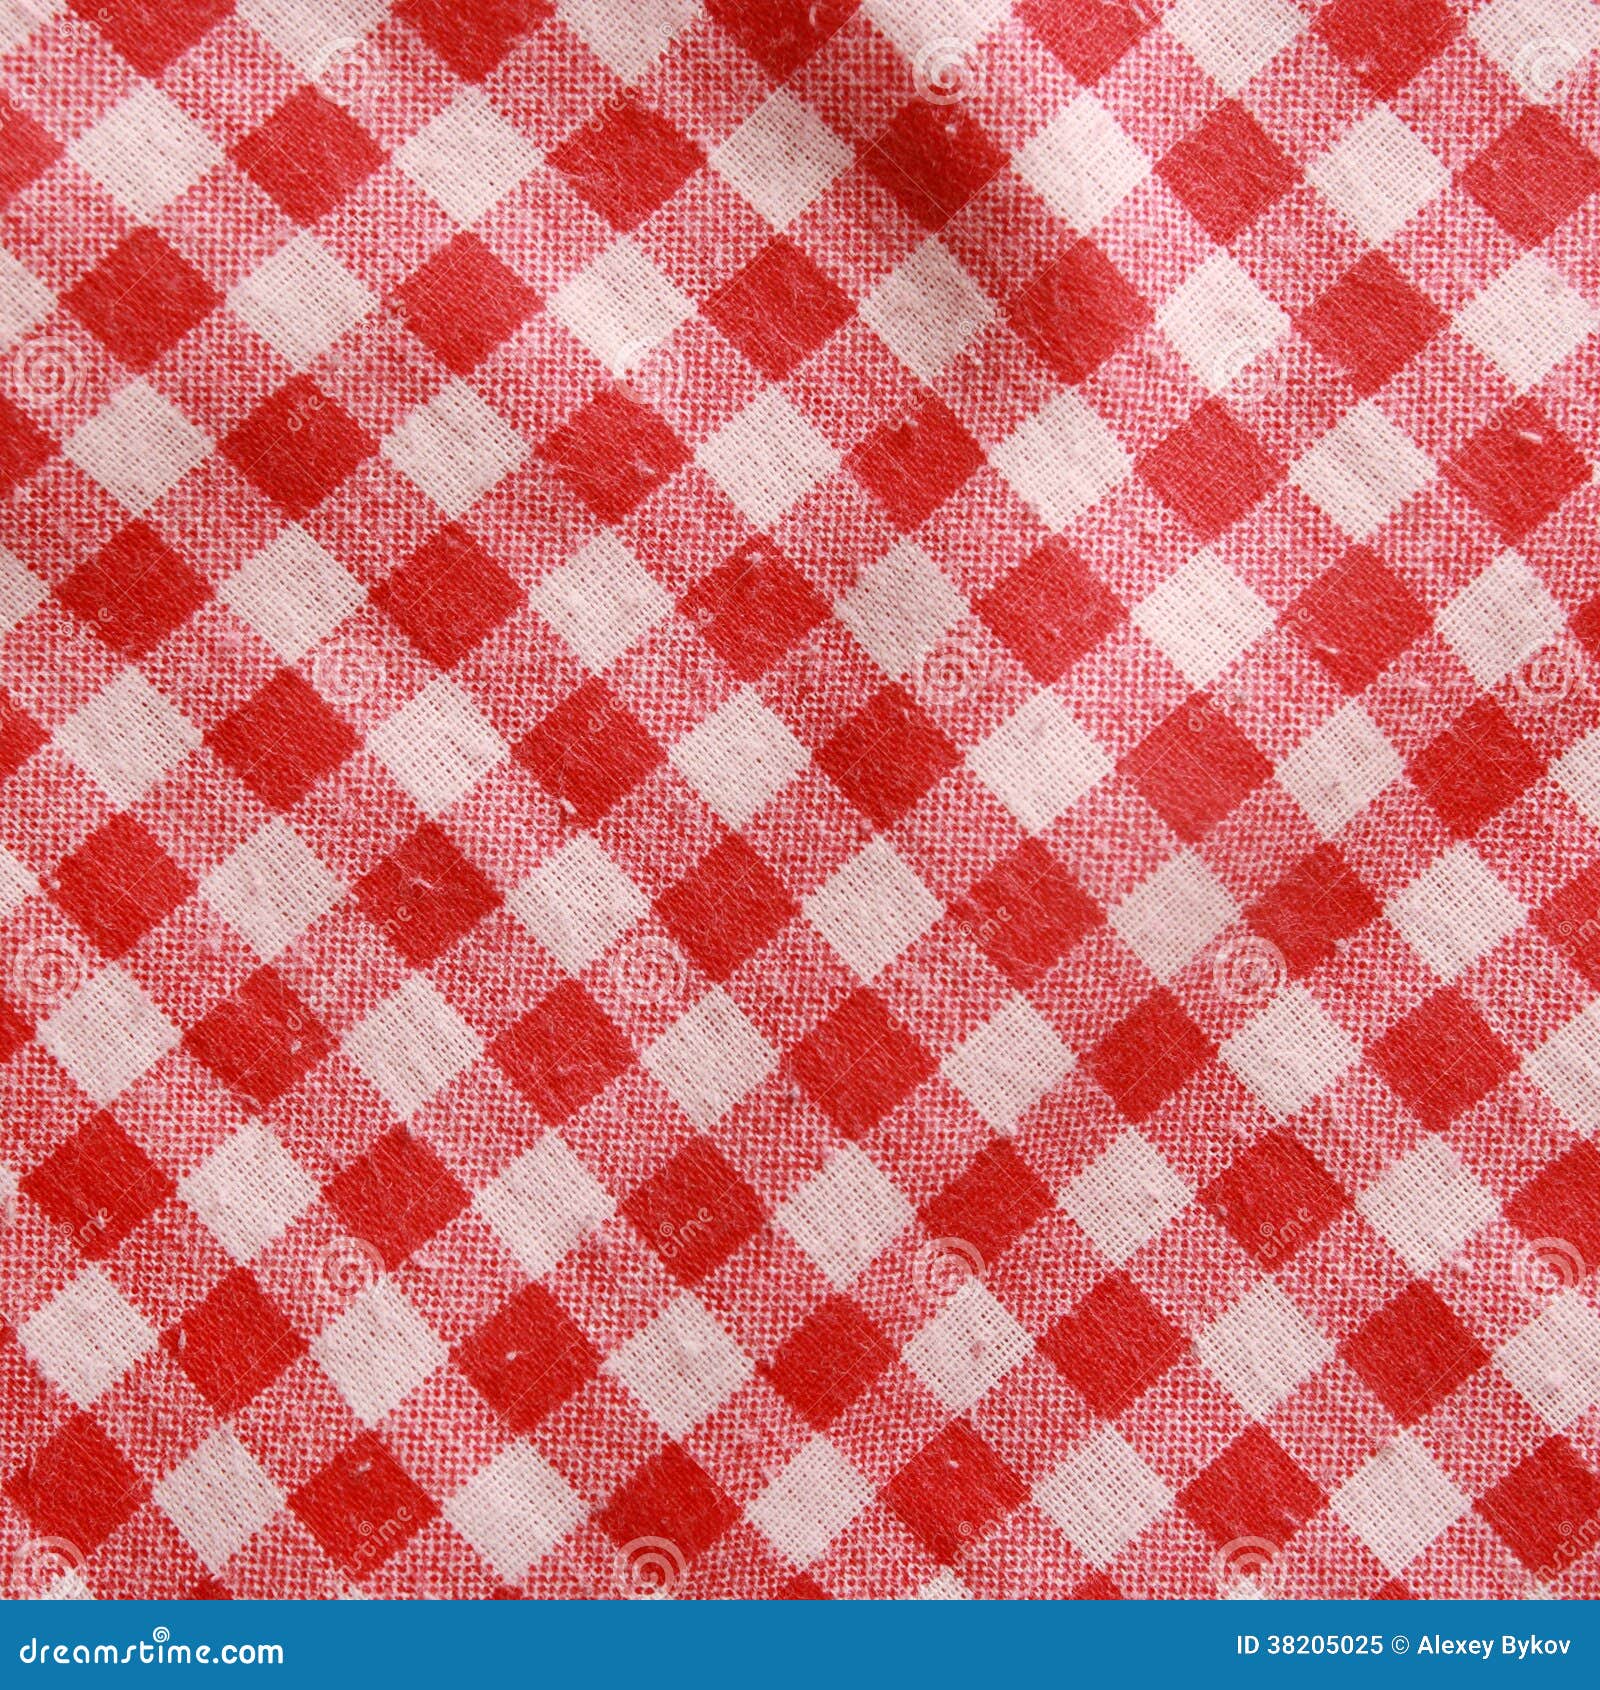 Texture Of A Red And White Checkered Picnic Blanket. Stock Image